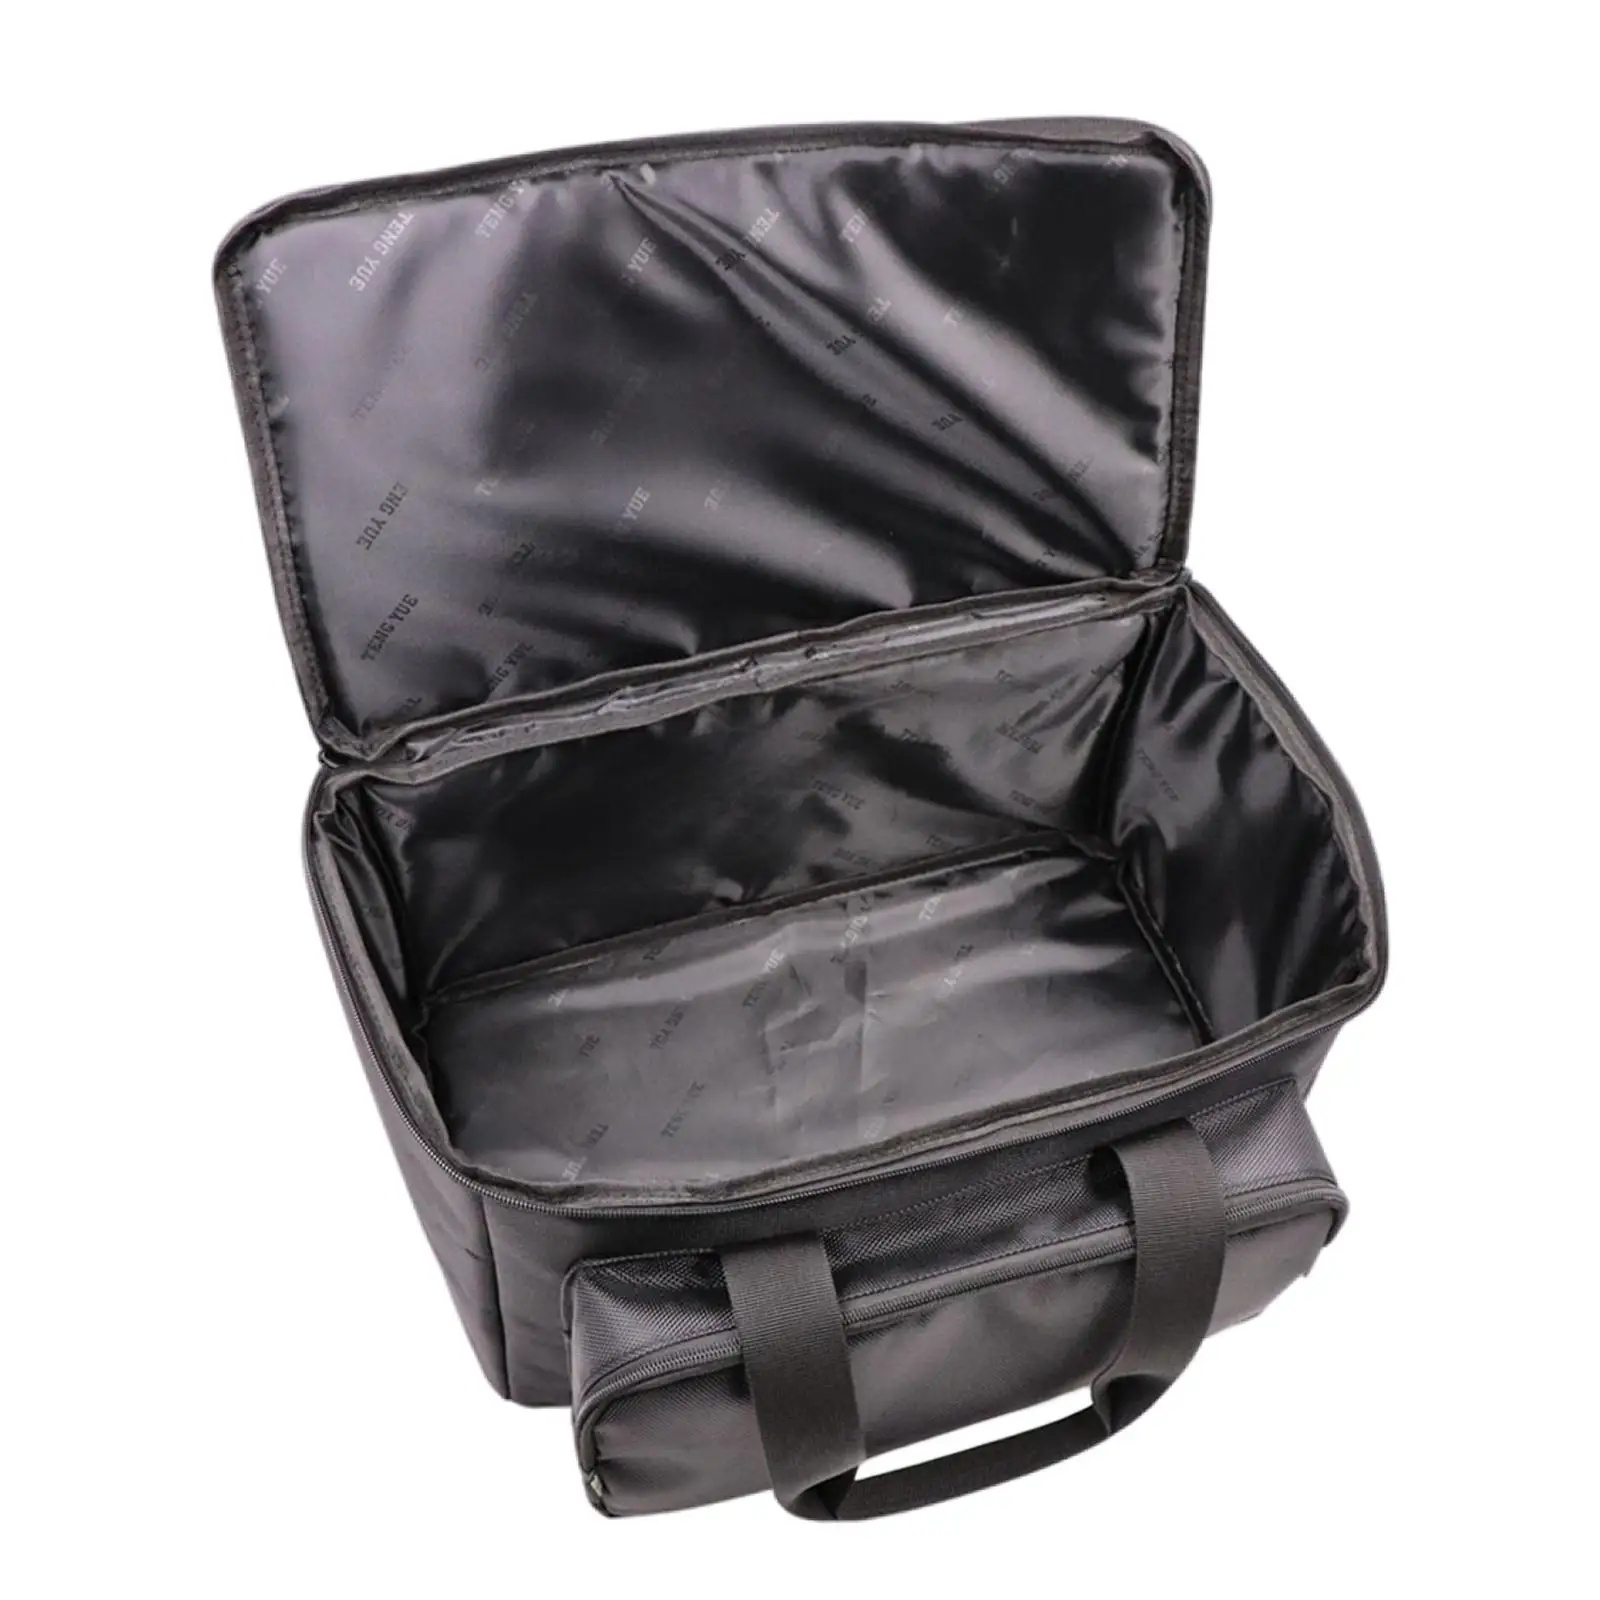 Speaker Case, Box Carrying Bag for  Guitar Microphones Effects Pedals